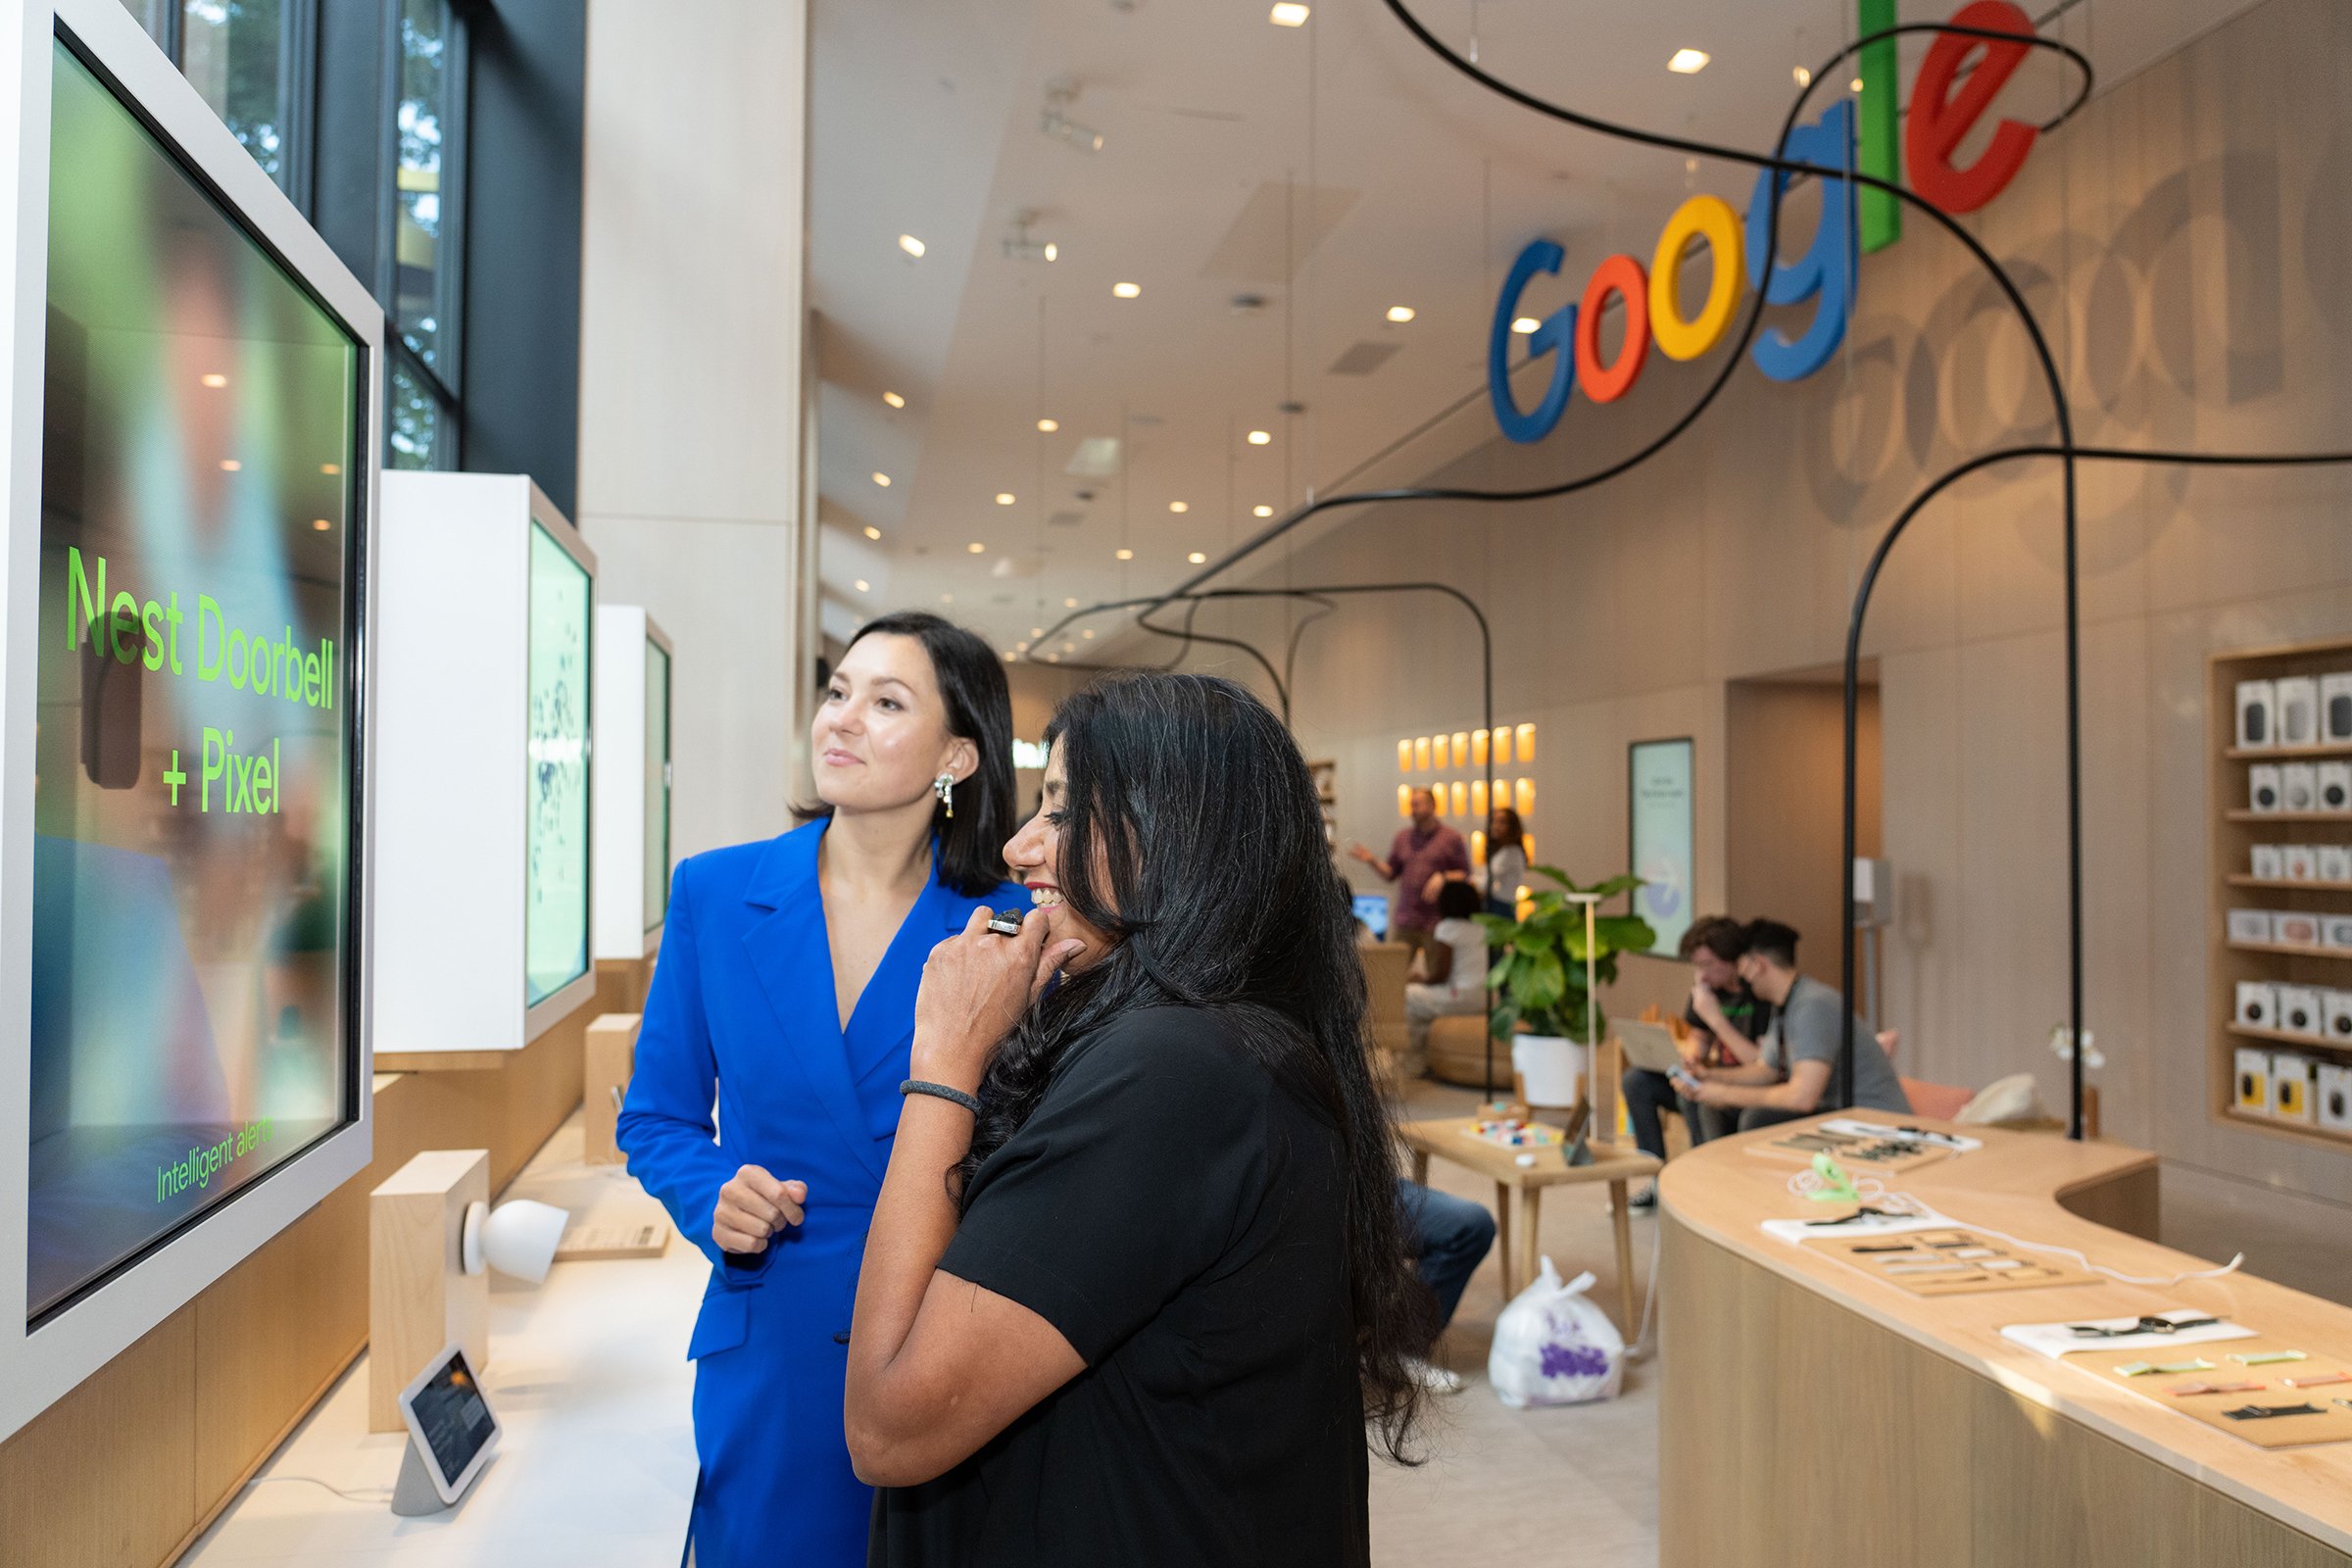 FEATURES_ Madame Architect Presents Julia Gamolina (left) and Suchi Reddy (right) at the Google Store_Courtesy of Robert Jones.jpg